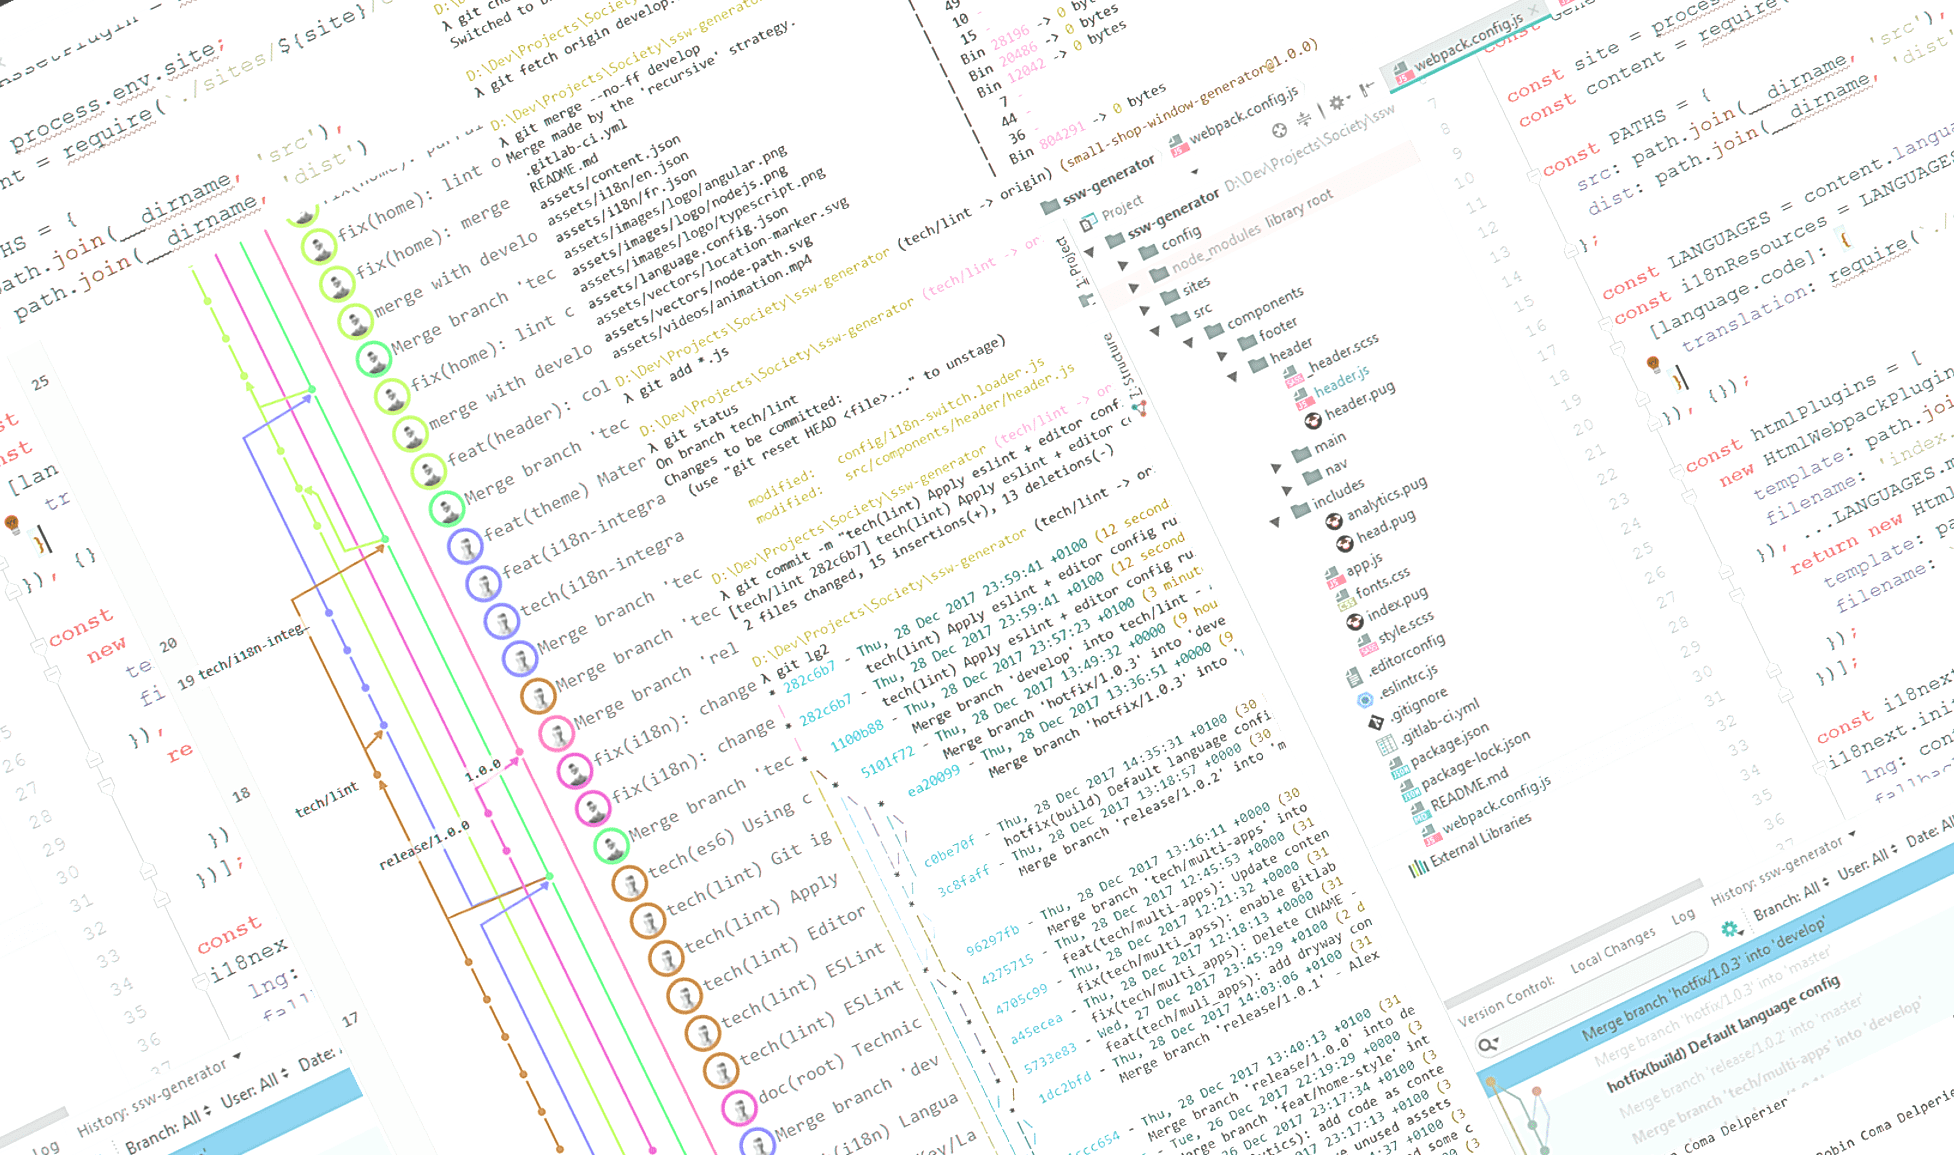 Combination between IDE + console + Git graph